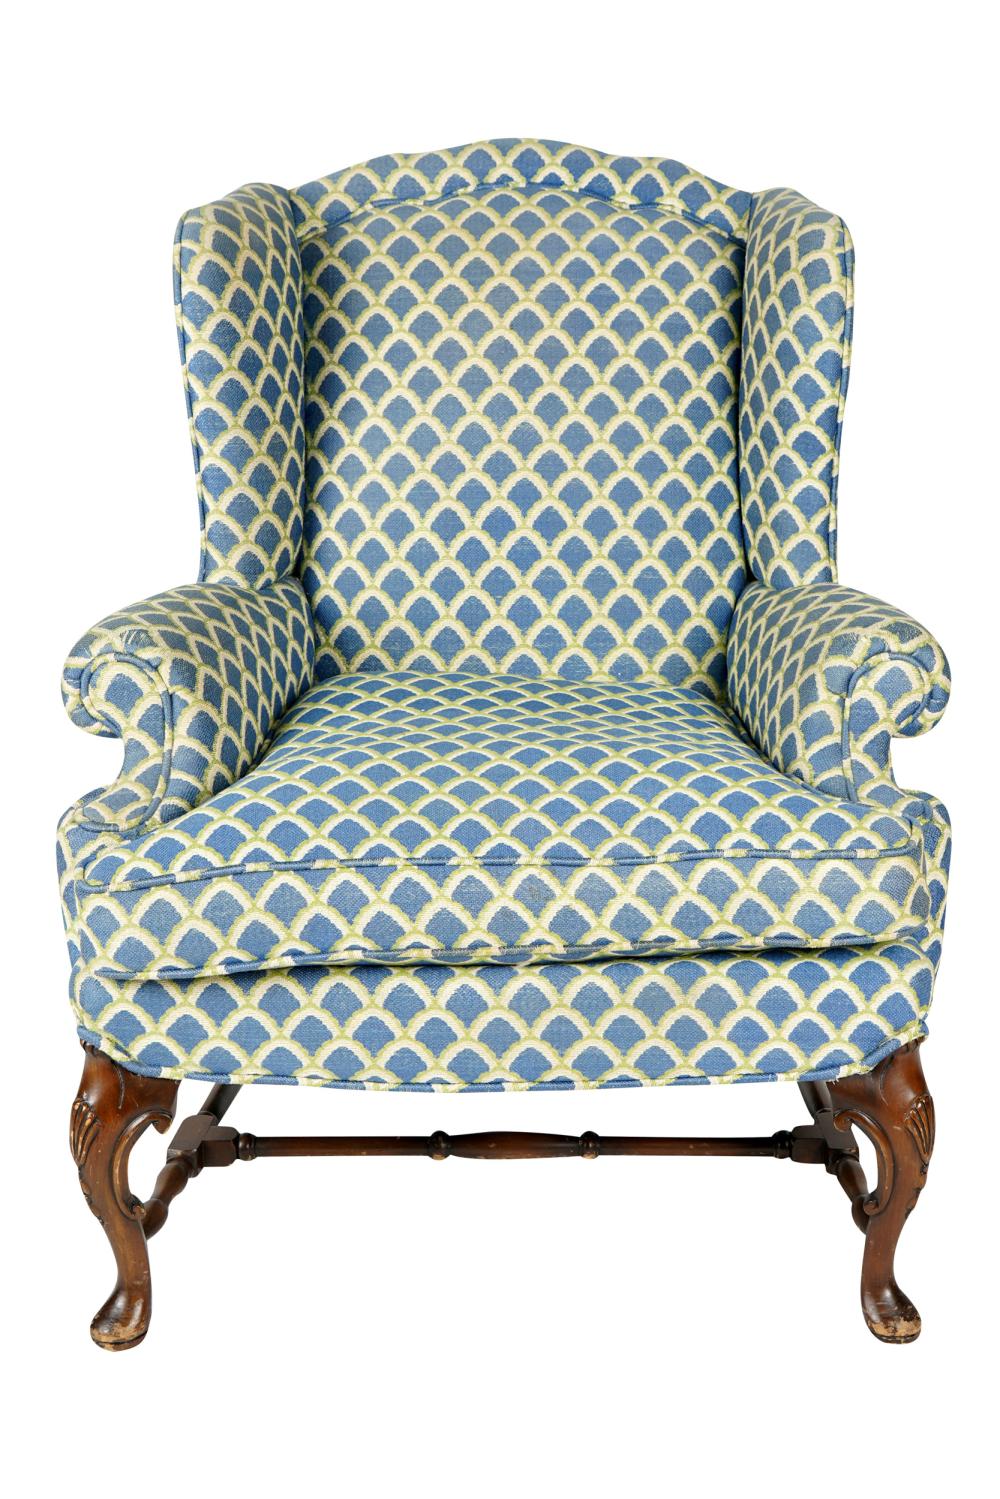 QUEEN ANNE STYLE ARMCHAIRcovered 3325ec